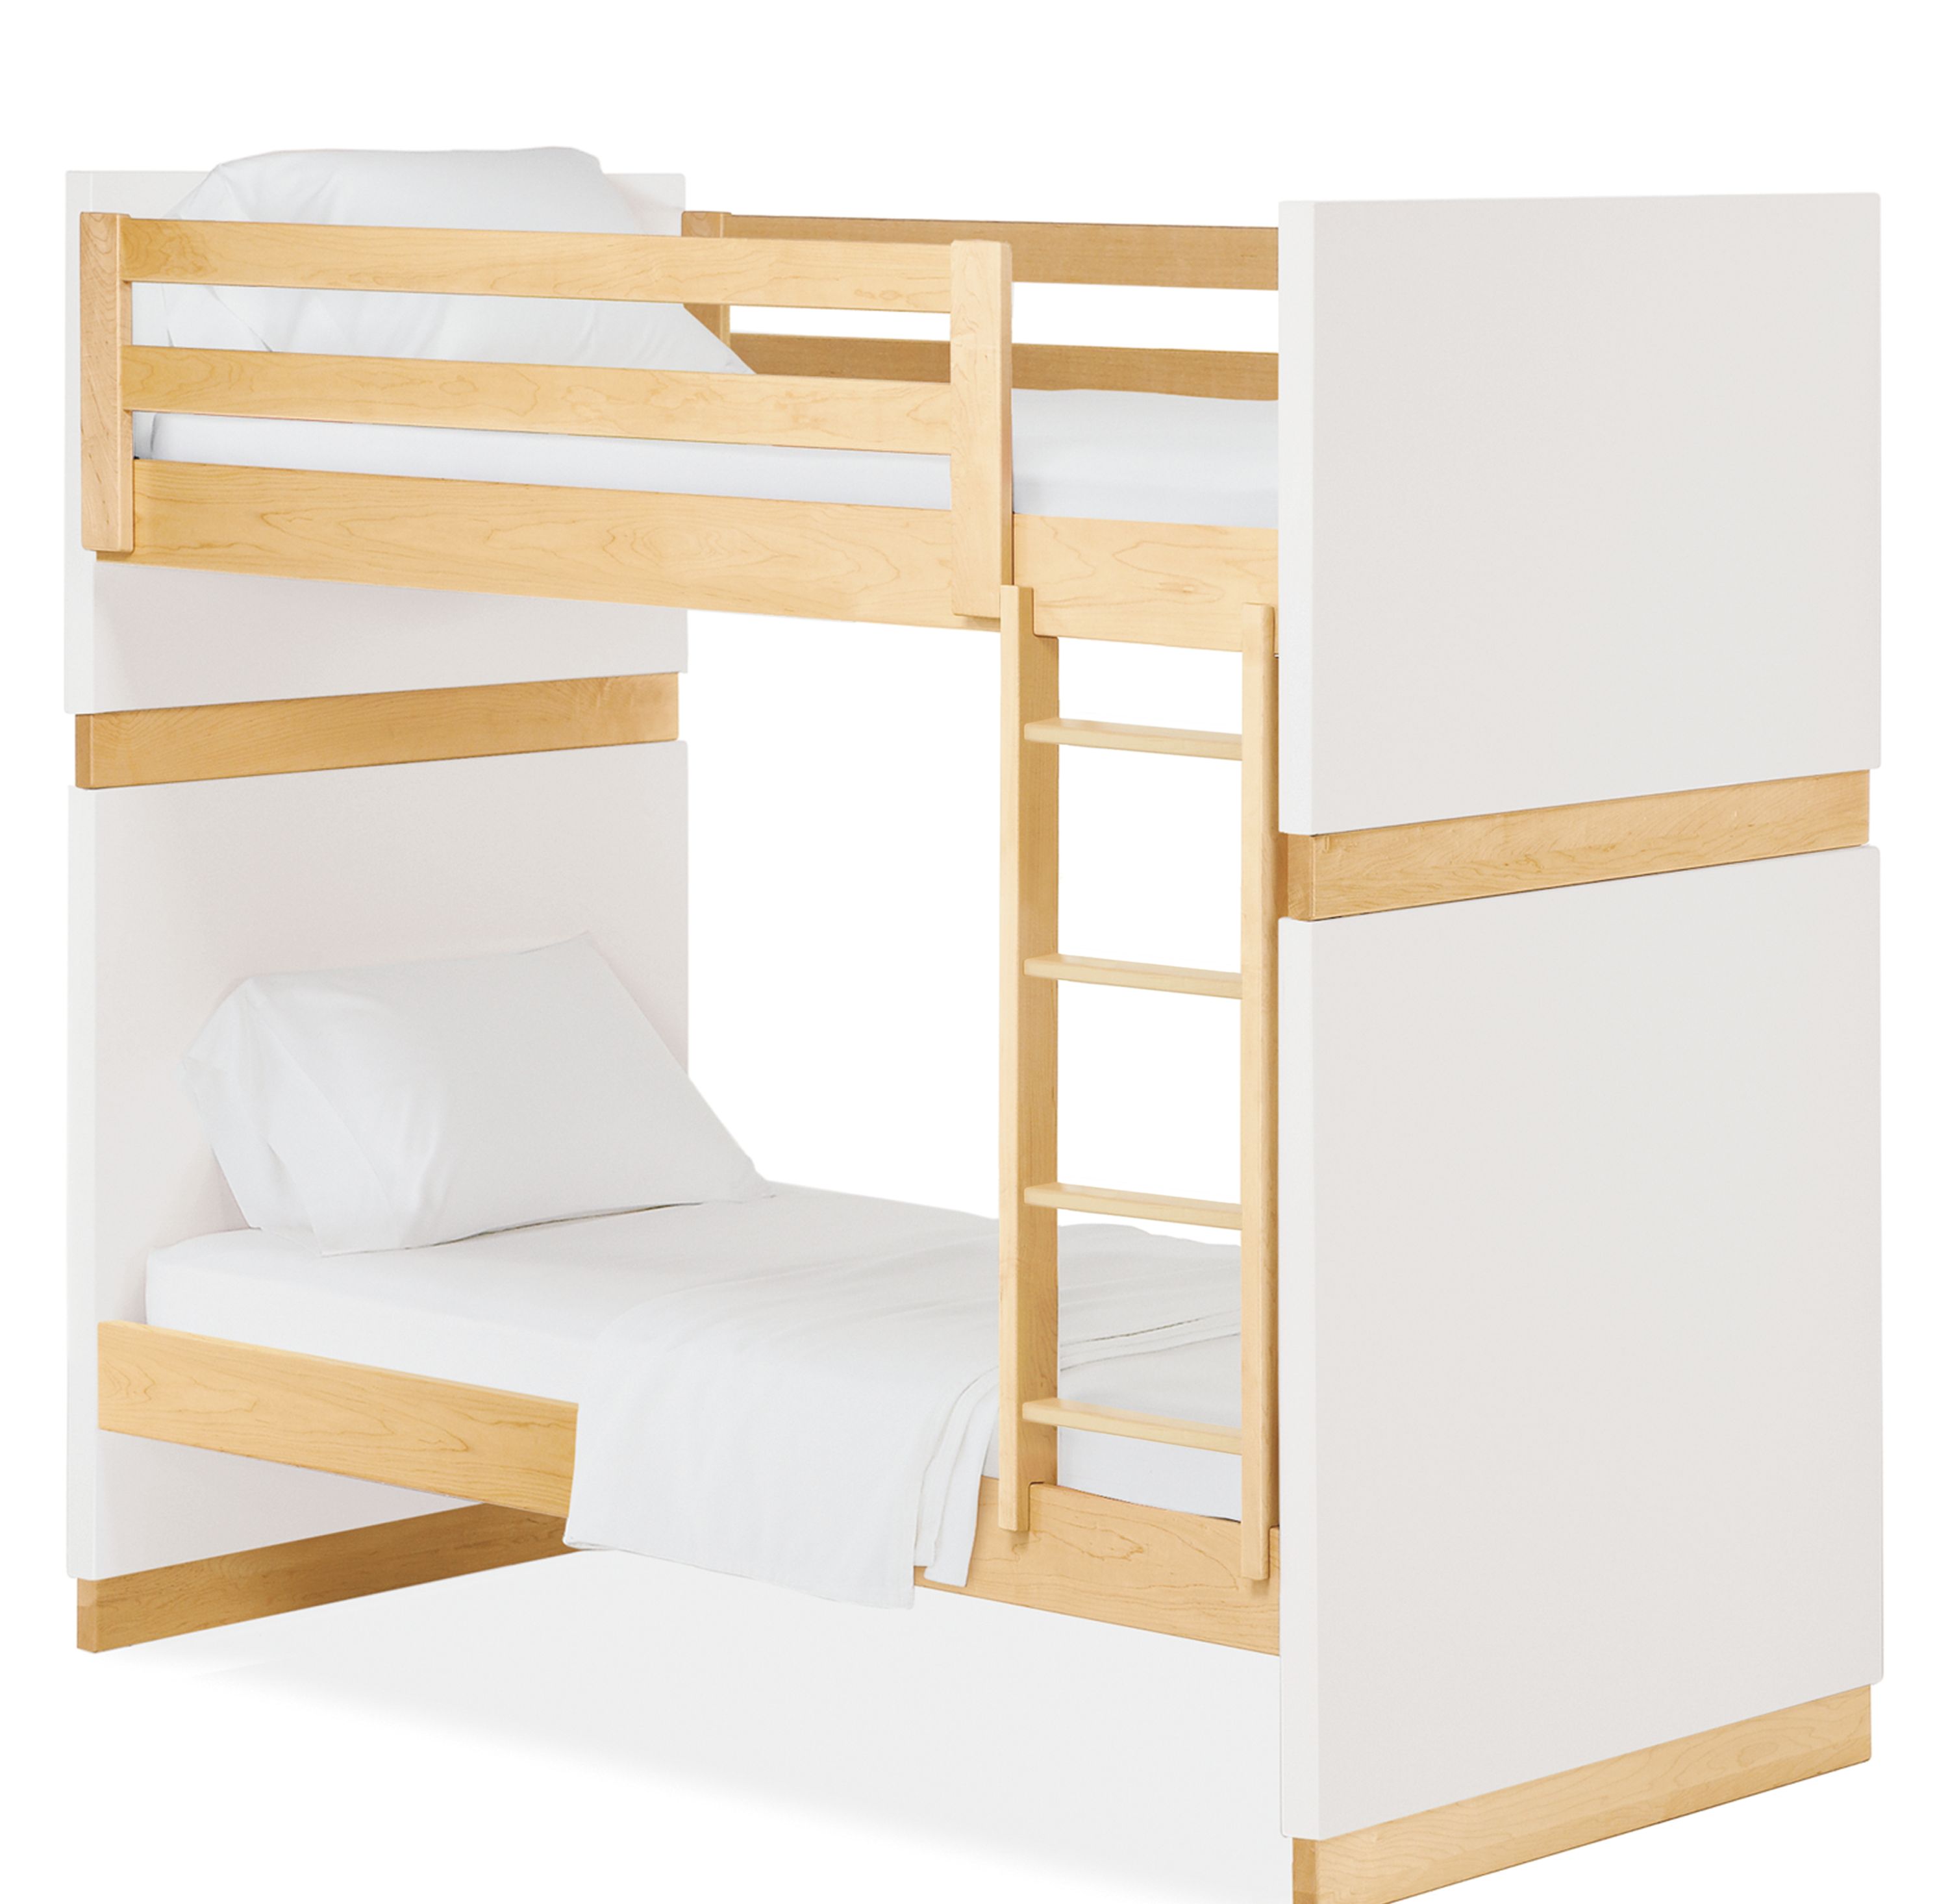 Moda Bunk Beds Twin Over, Rooms To Go Bunk Bed Assembly Instructions